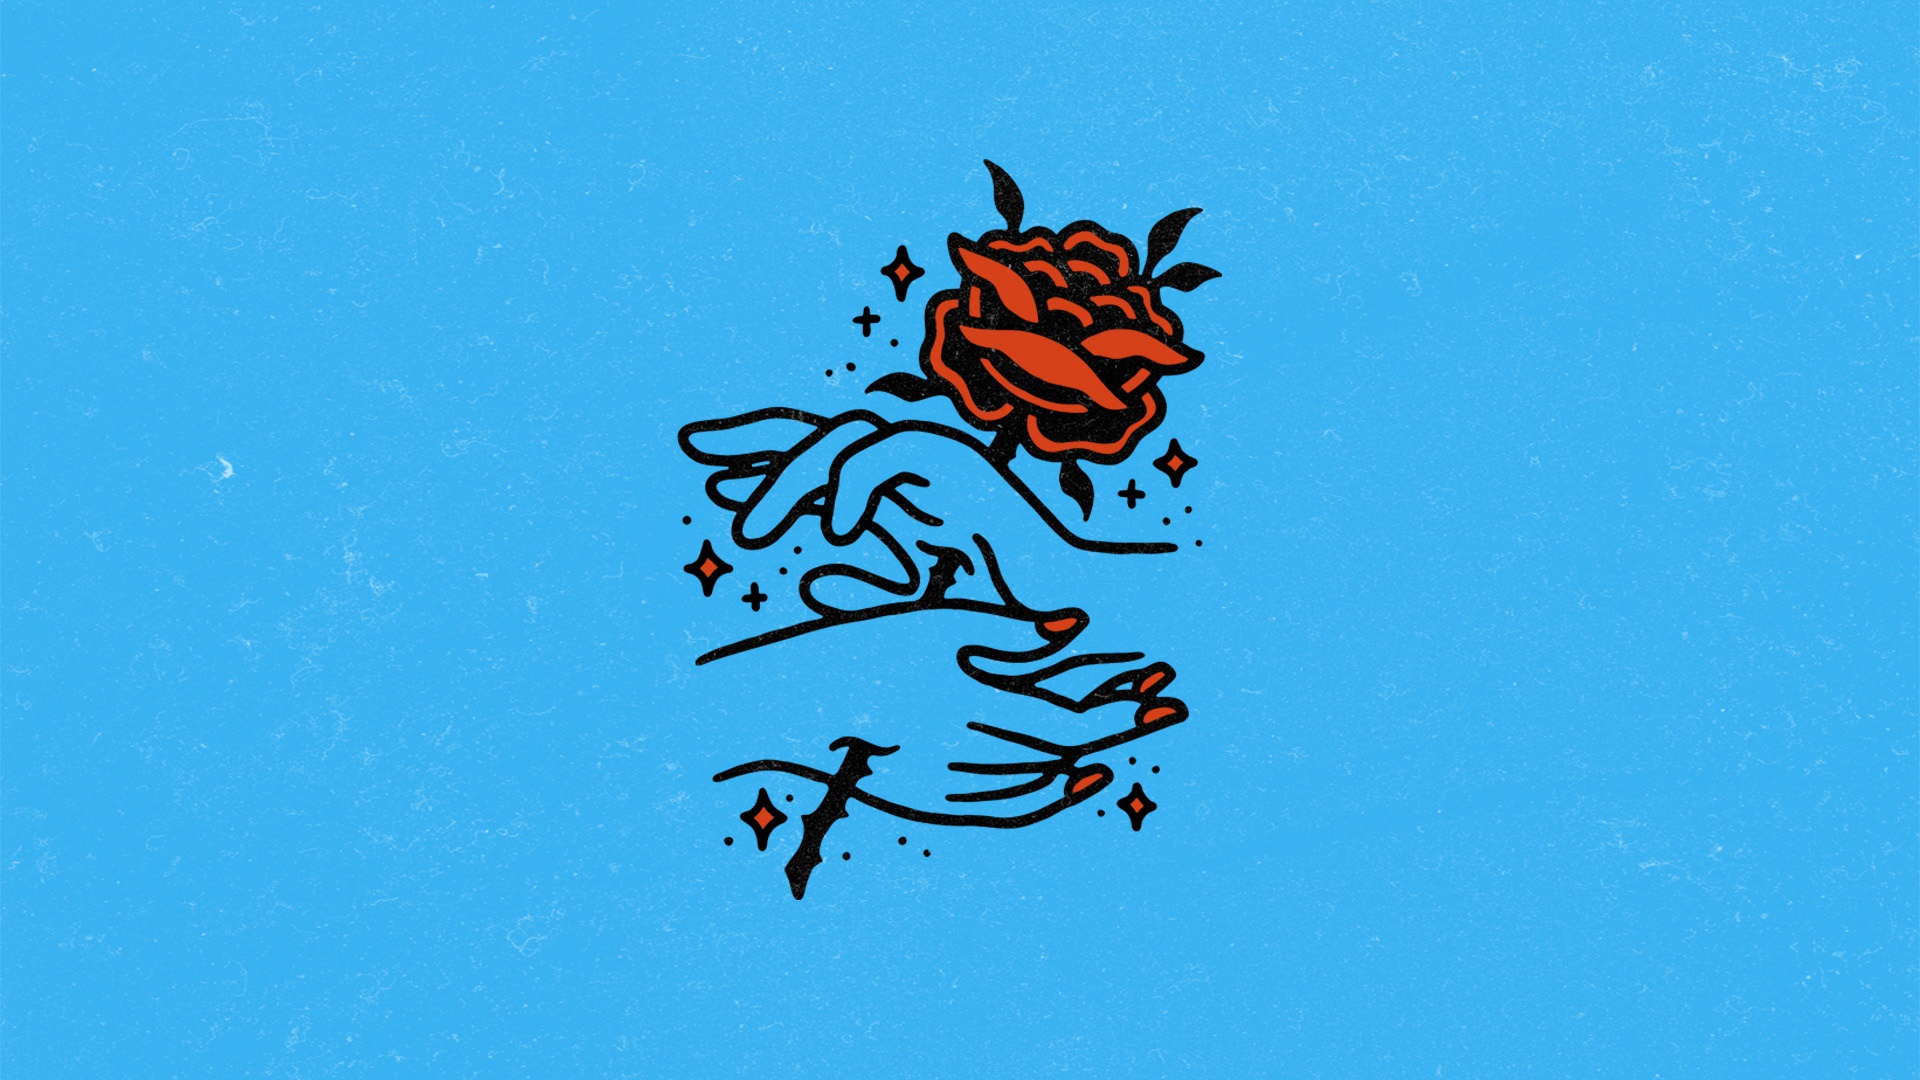 General 1920x1080 artwork simple background minimalism blue background hands painful rose flowers red flowers plants